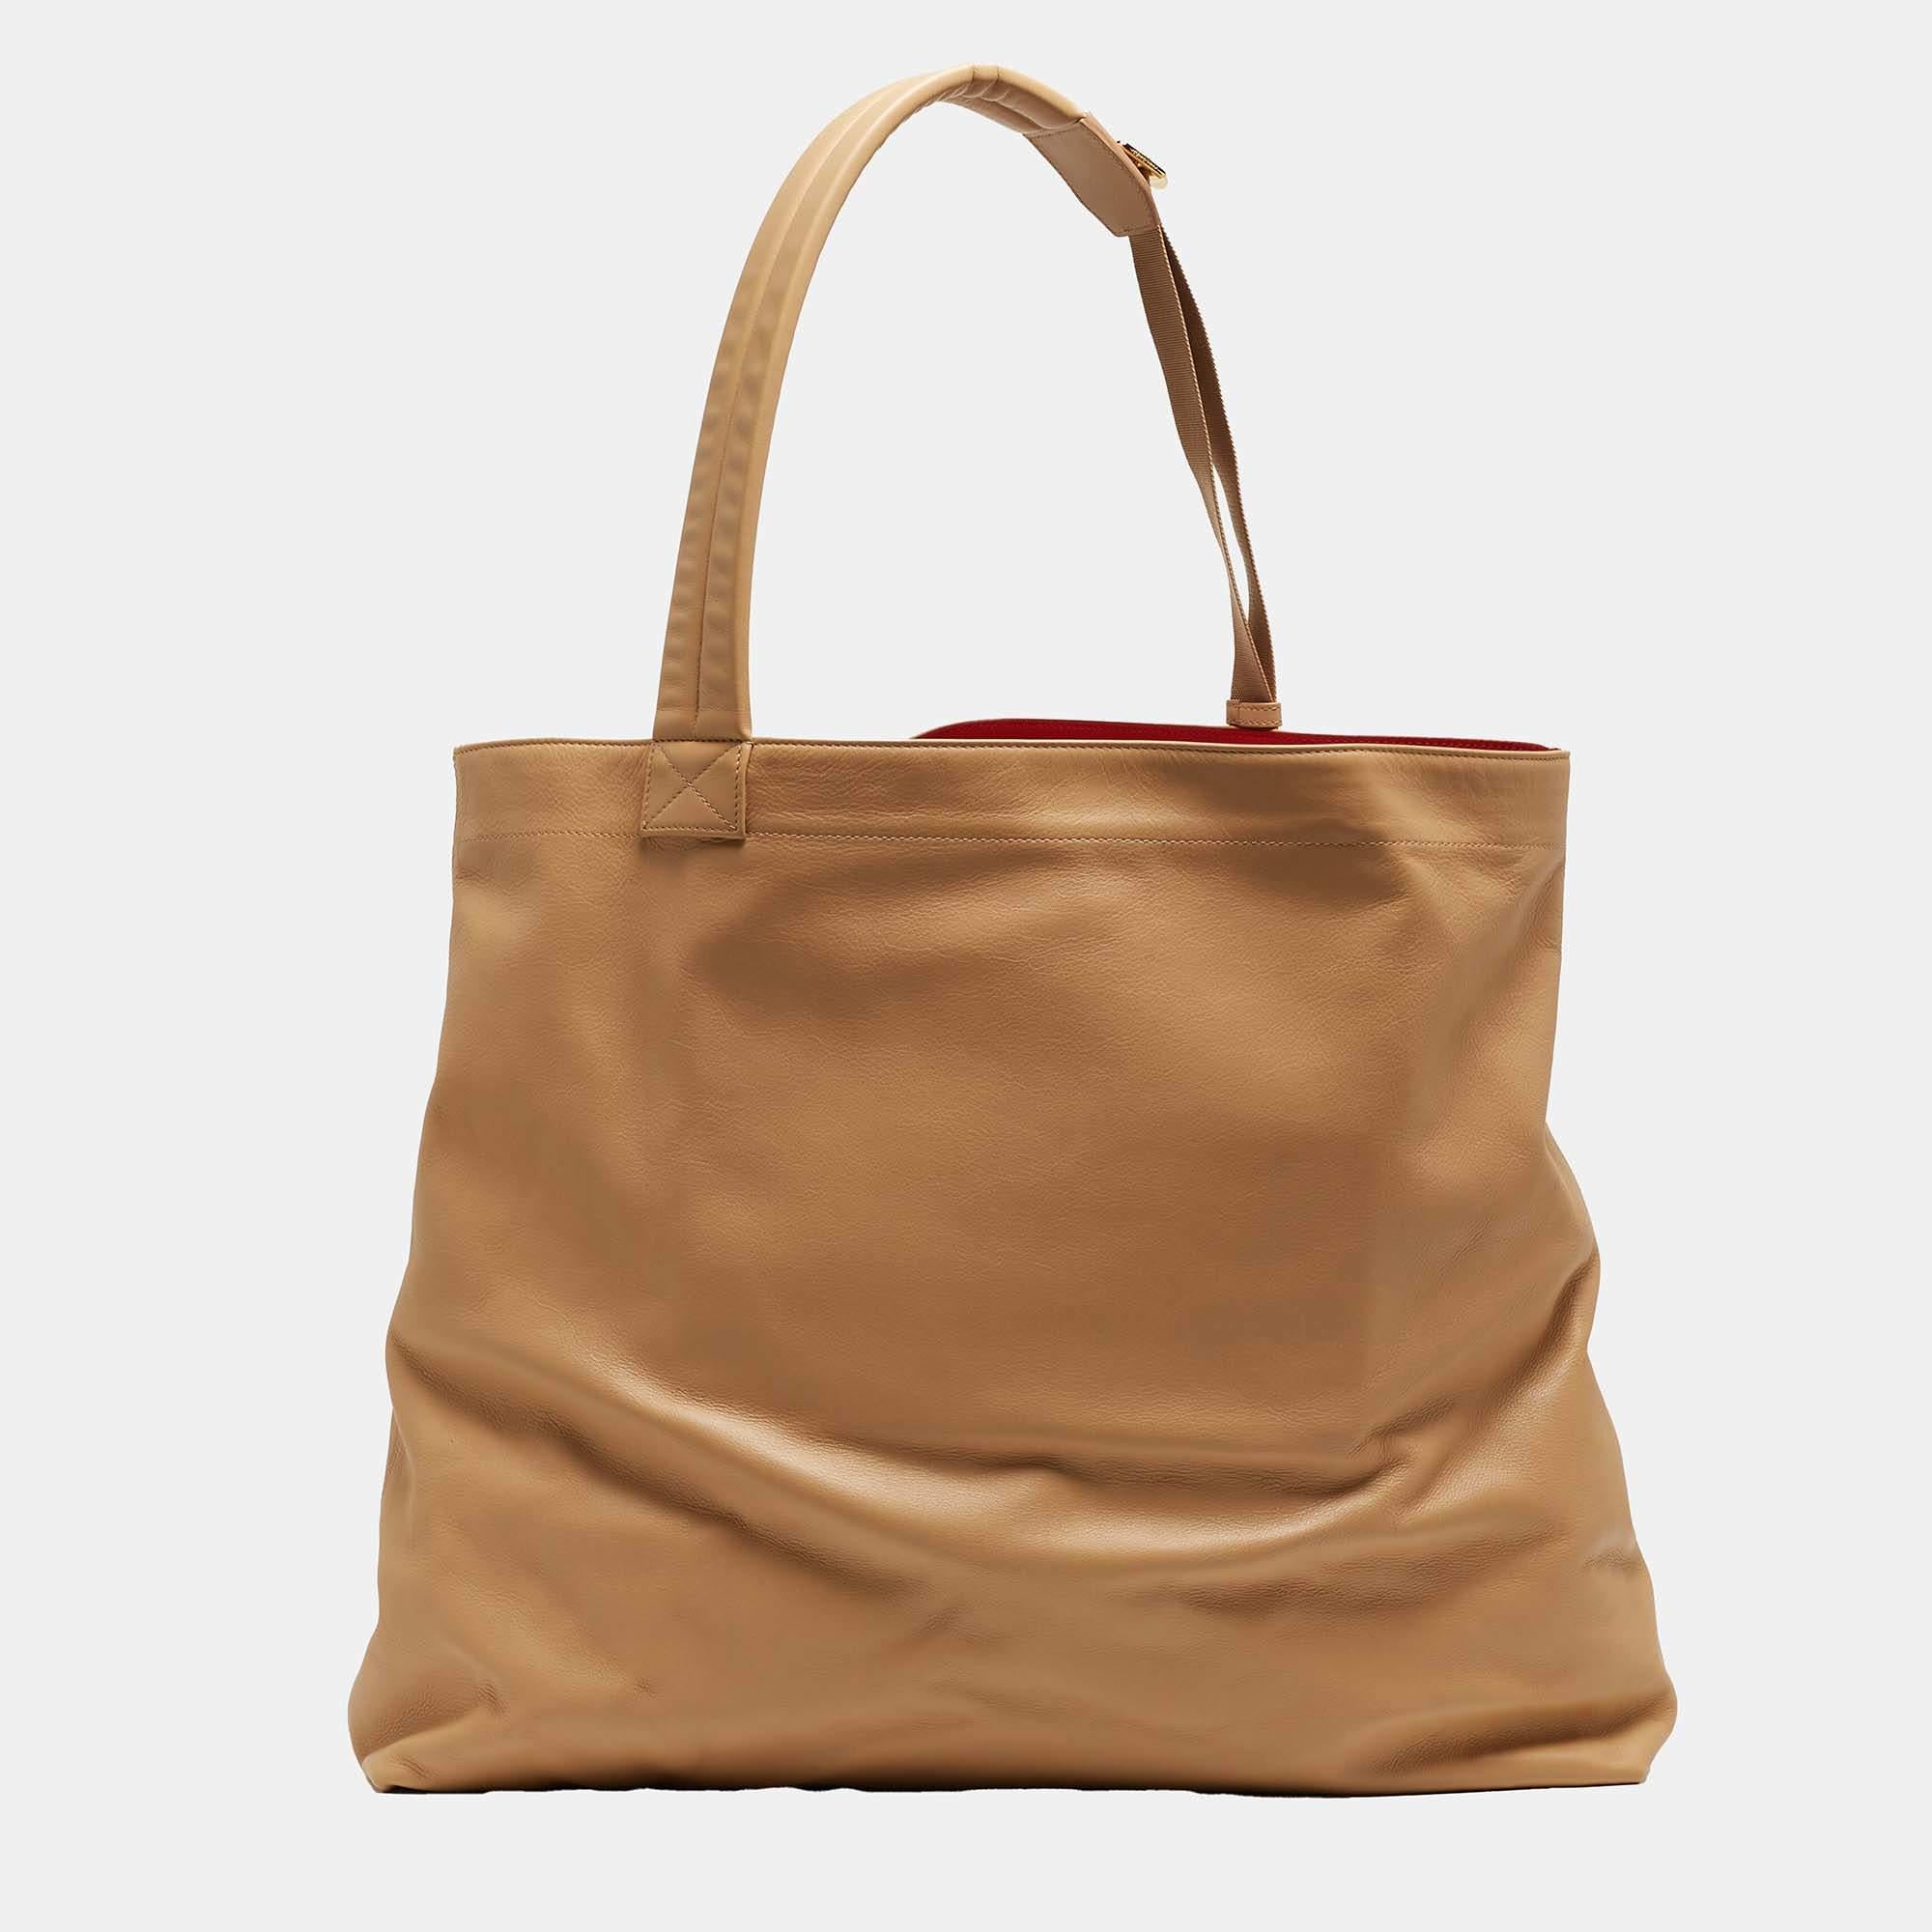 Created from high-quality materials, this tote is enriched with functional and classic elements. It can be carried around conveniently, and its interior is perfectly sized to keep your belongings with ease.

Includes: Original Dustbag, Info Booklet,